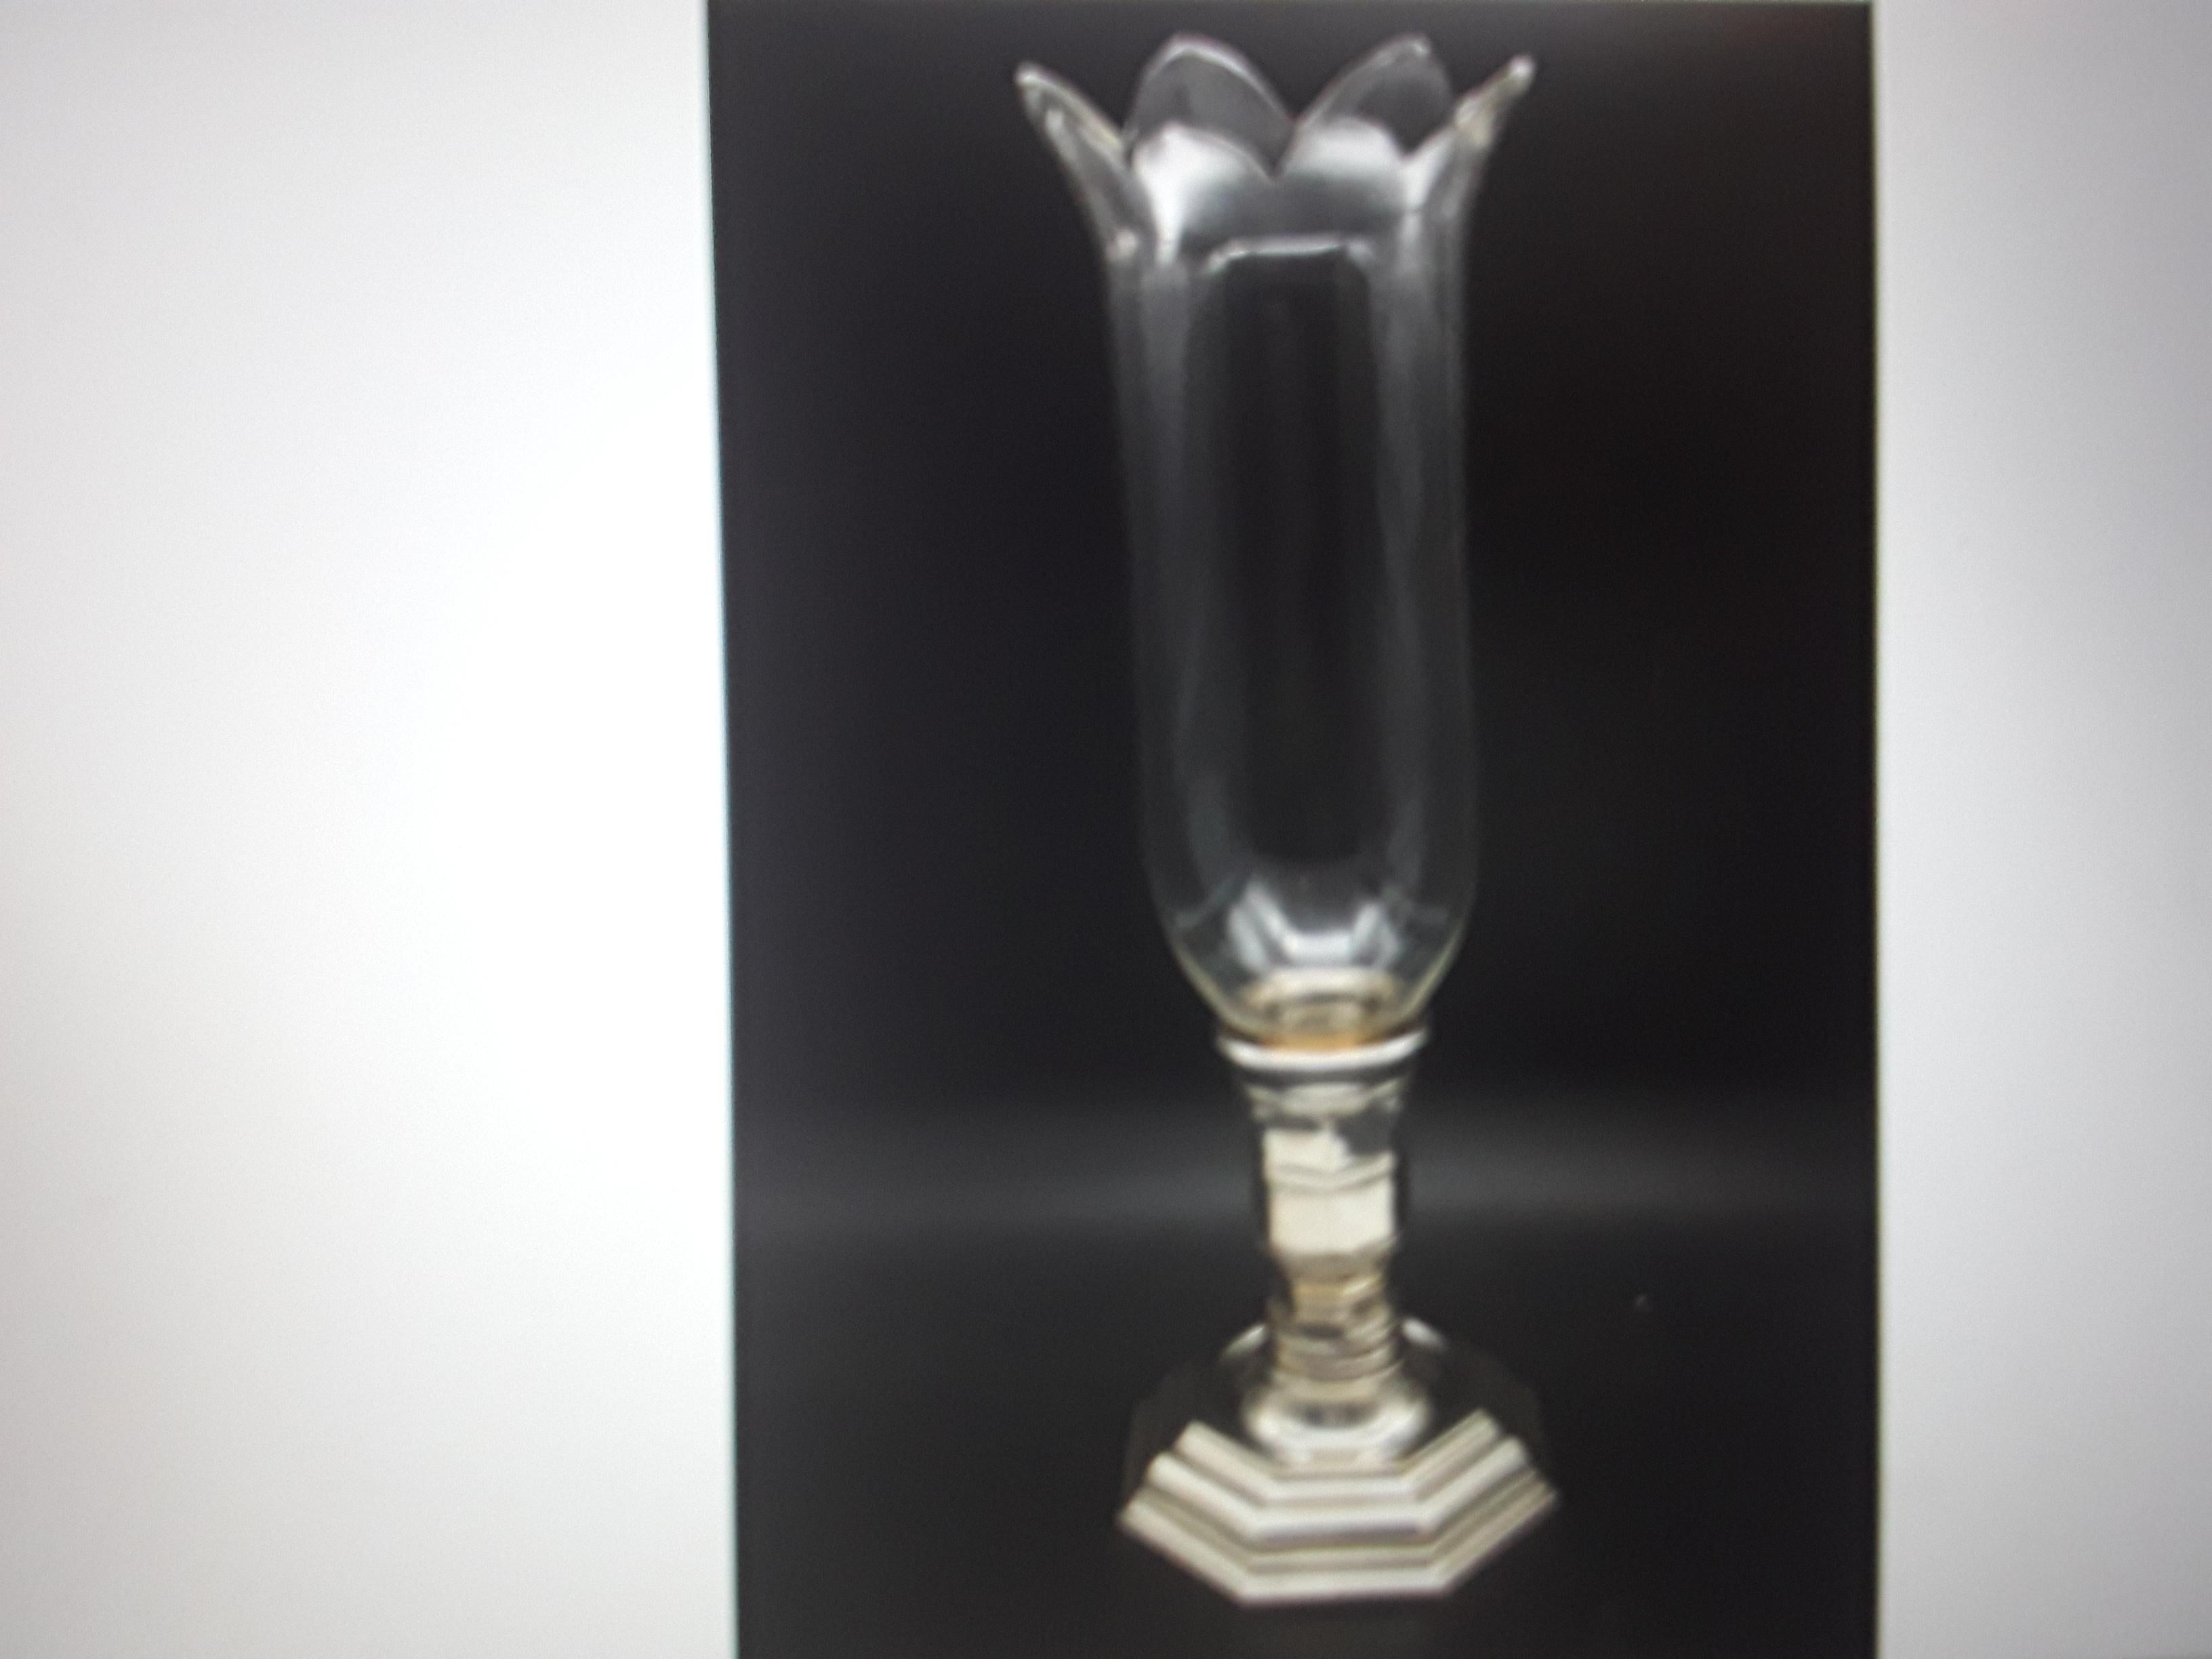 1930's Original Candle Lamp. Signed Baccarat Crystal Shade on Christofle Marked silver Base. This is an original set. Beautiful Candle Holder/ Candle Lamp.